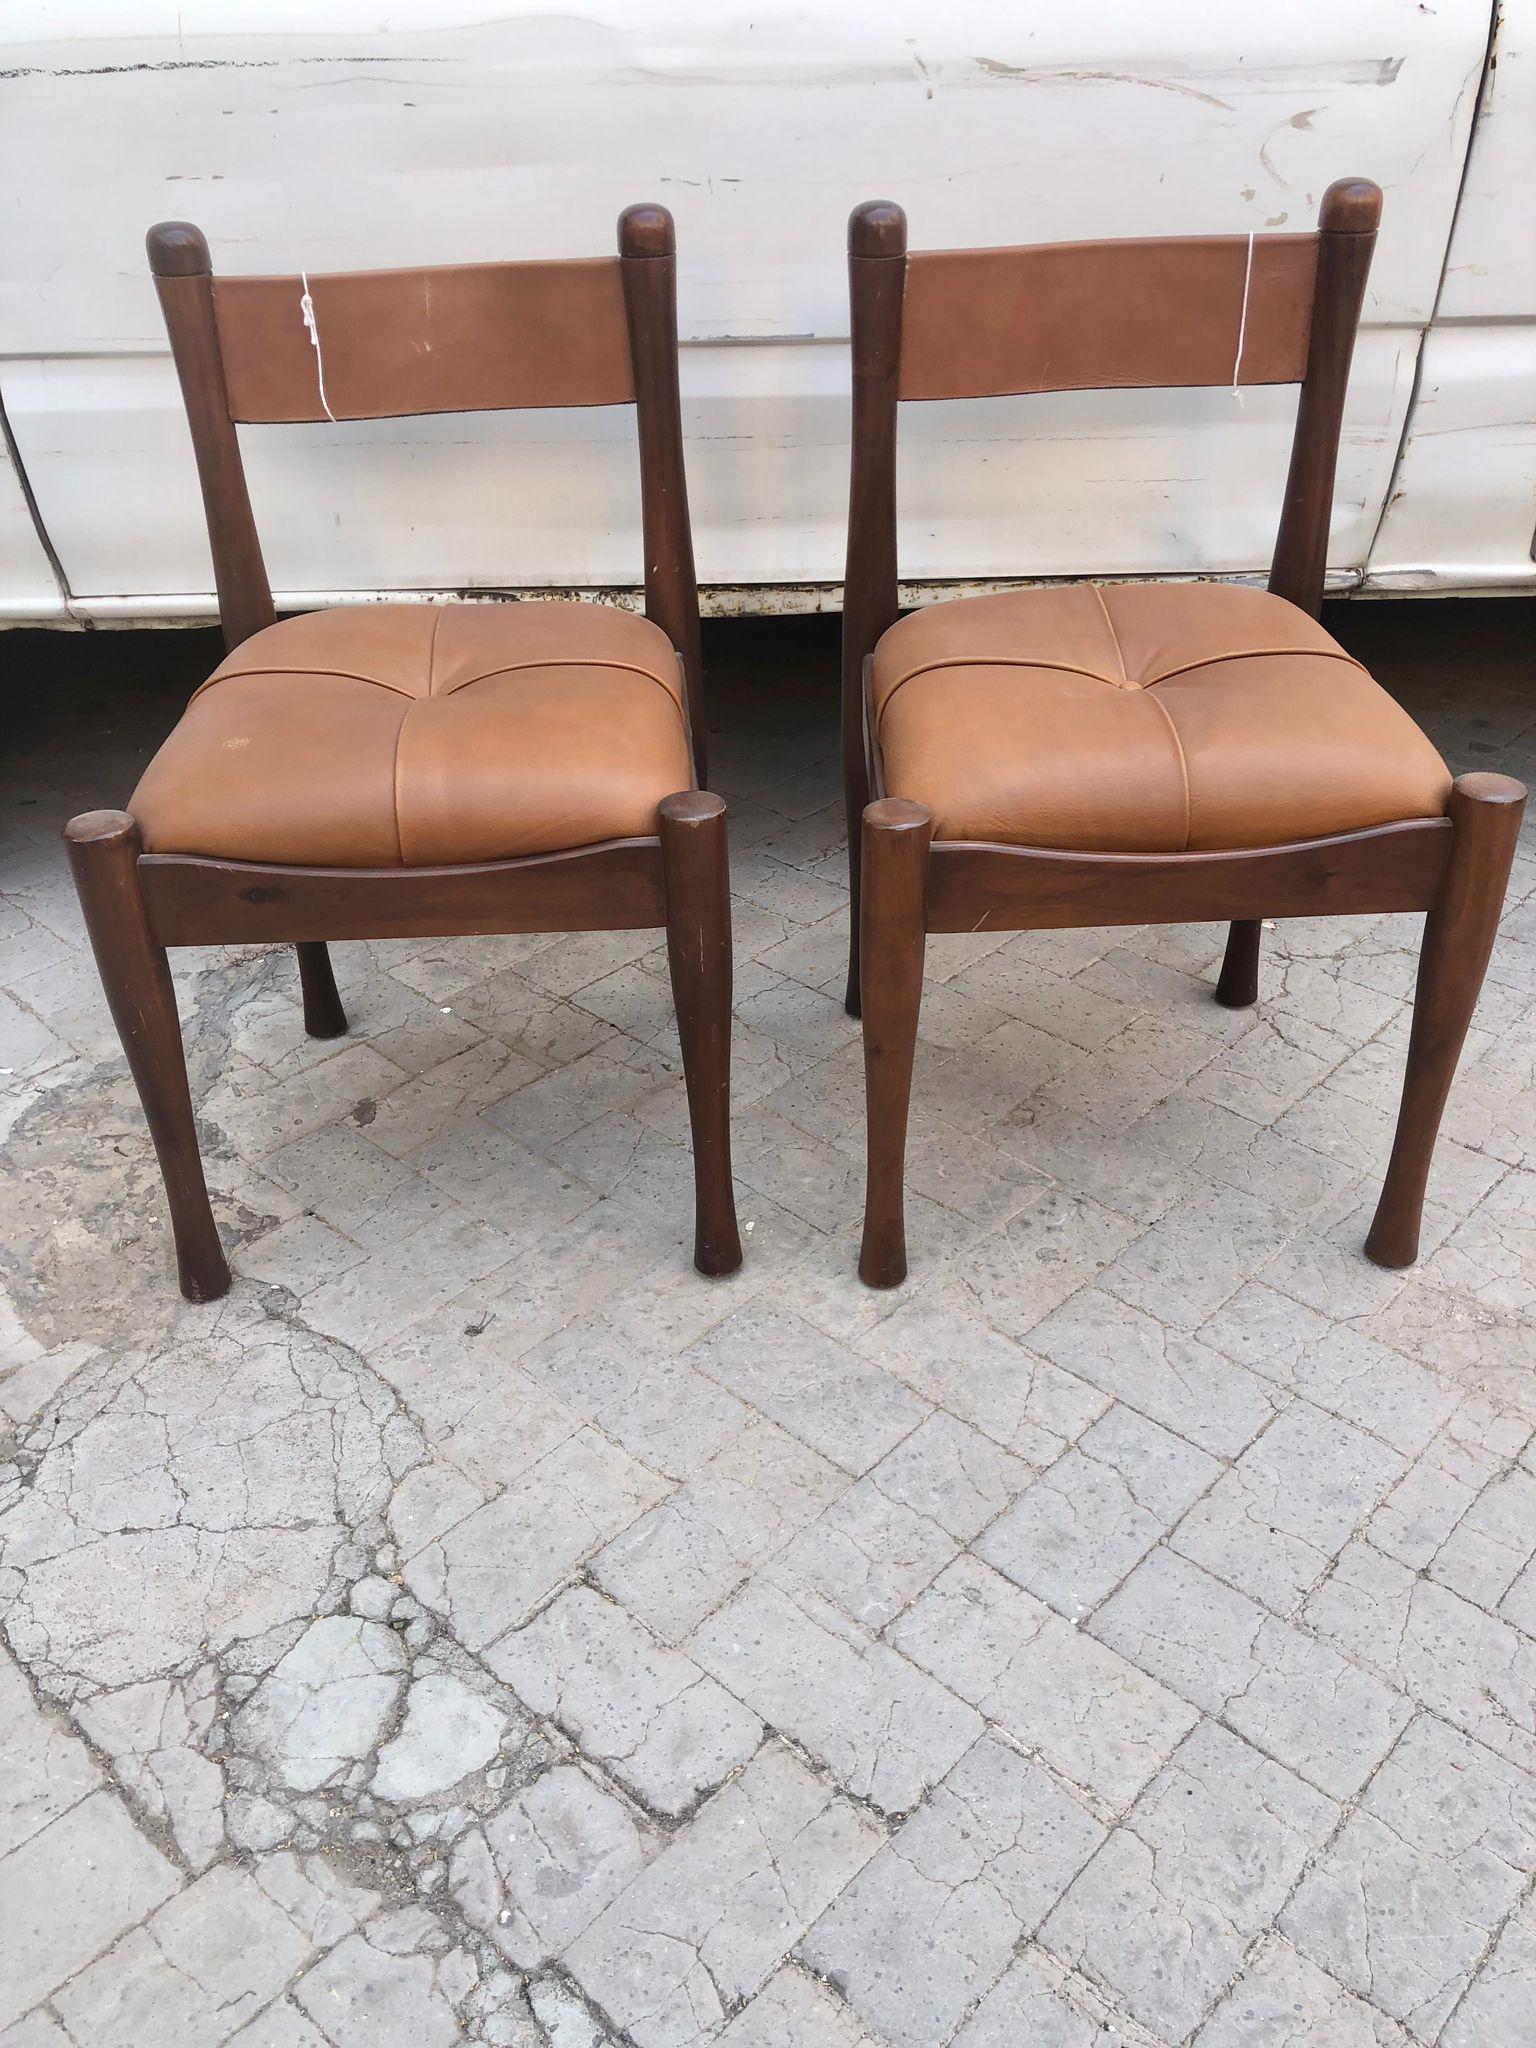 Amazing Pair of Italian Mid Century Modern Silvio Coppola chairs for Bernini.
This set of two chairs was designed by Silvio Coppola for Bernini, and produced in the 1960 in Italy. The chairs frame are made of beech wood with foam padding and